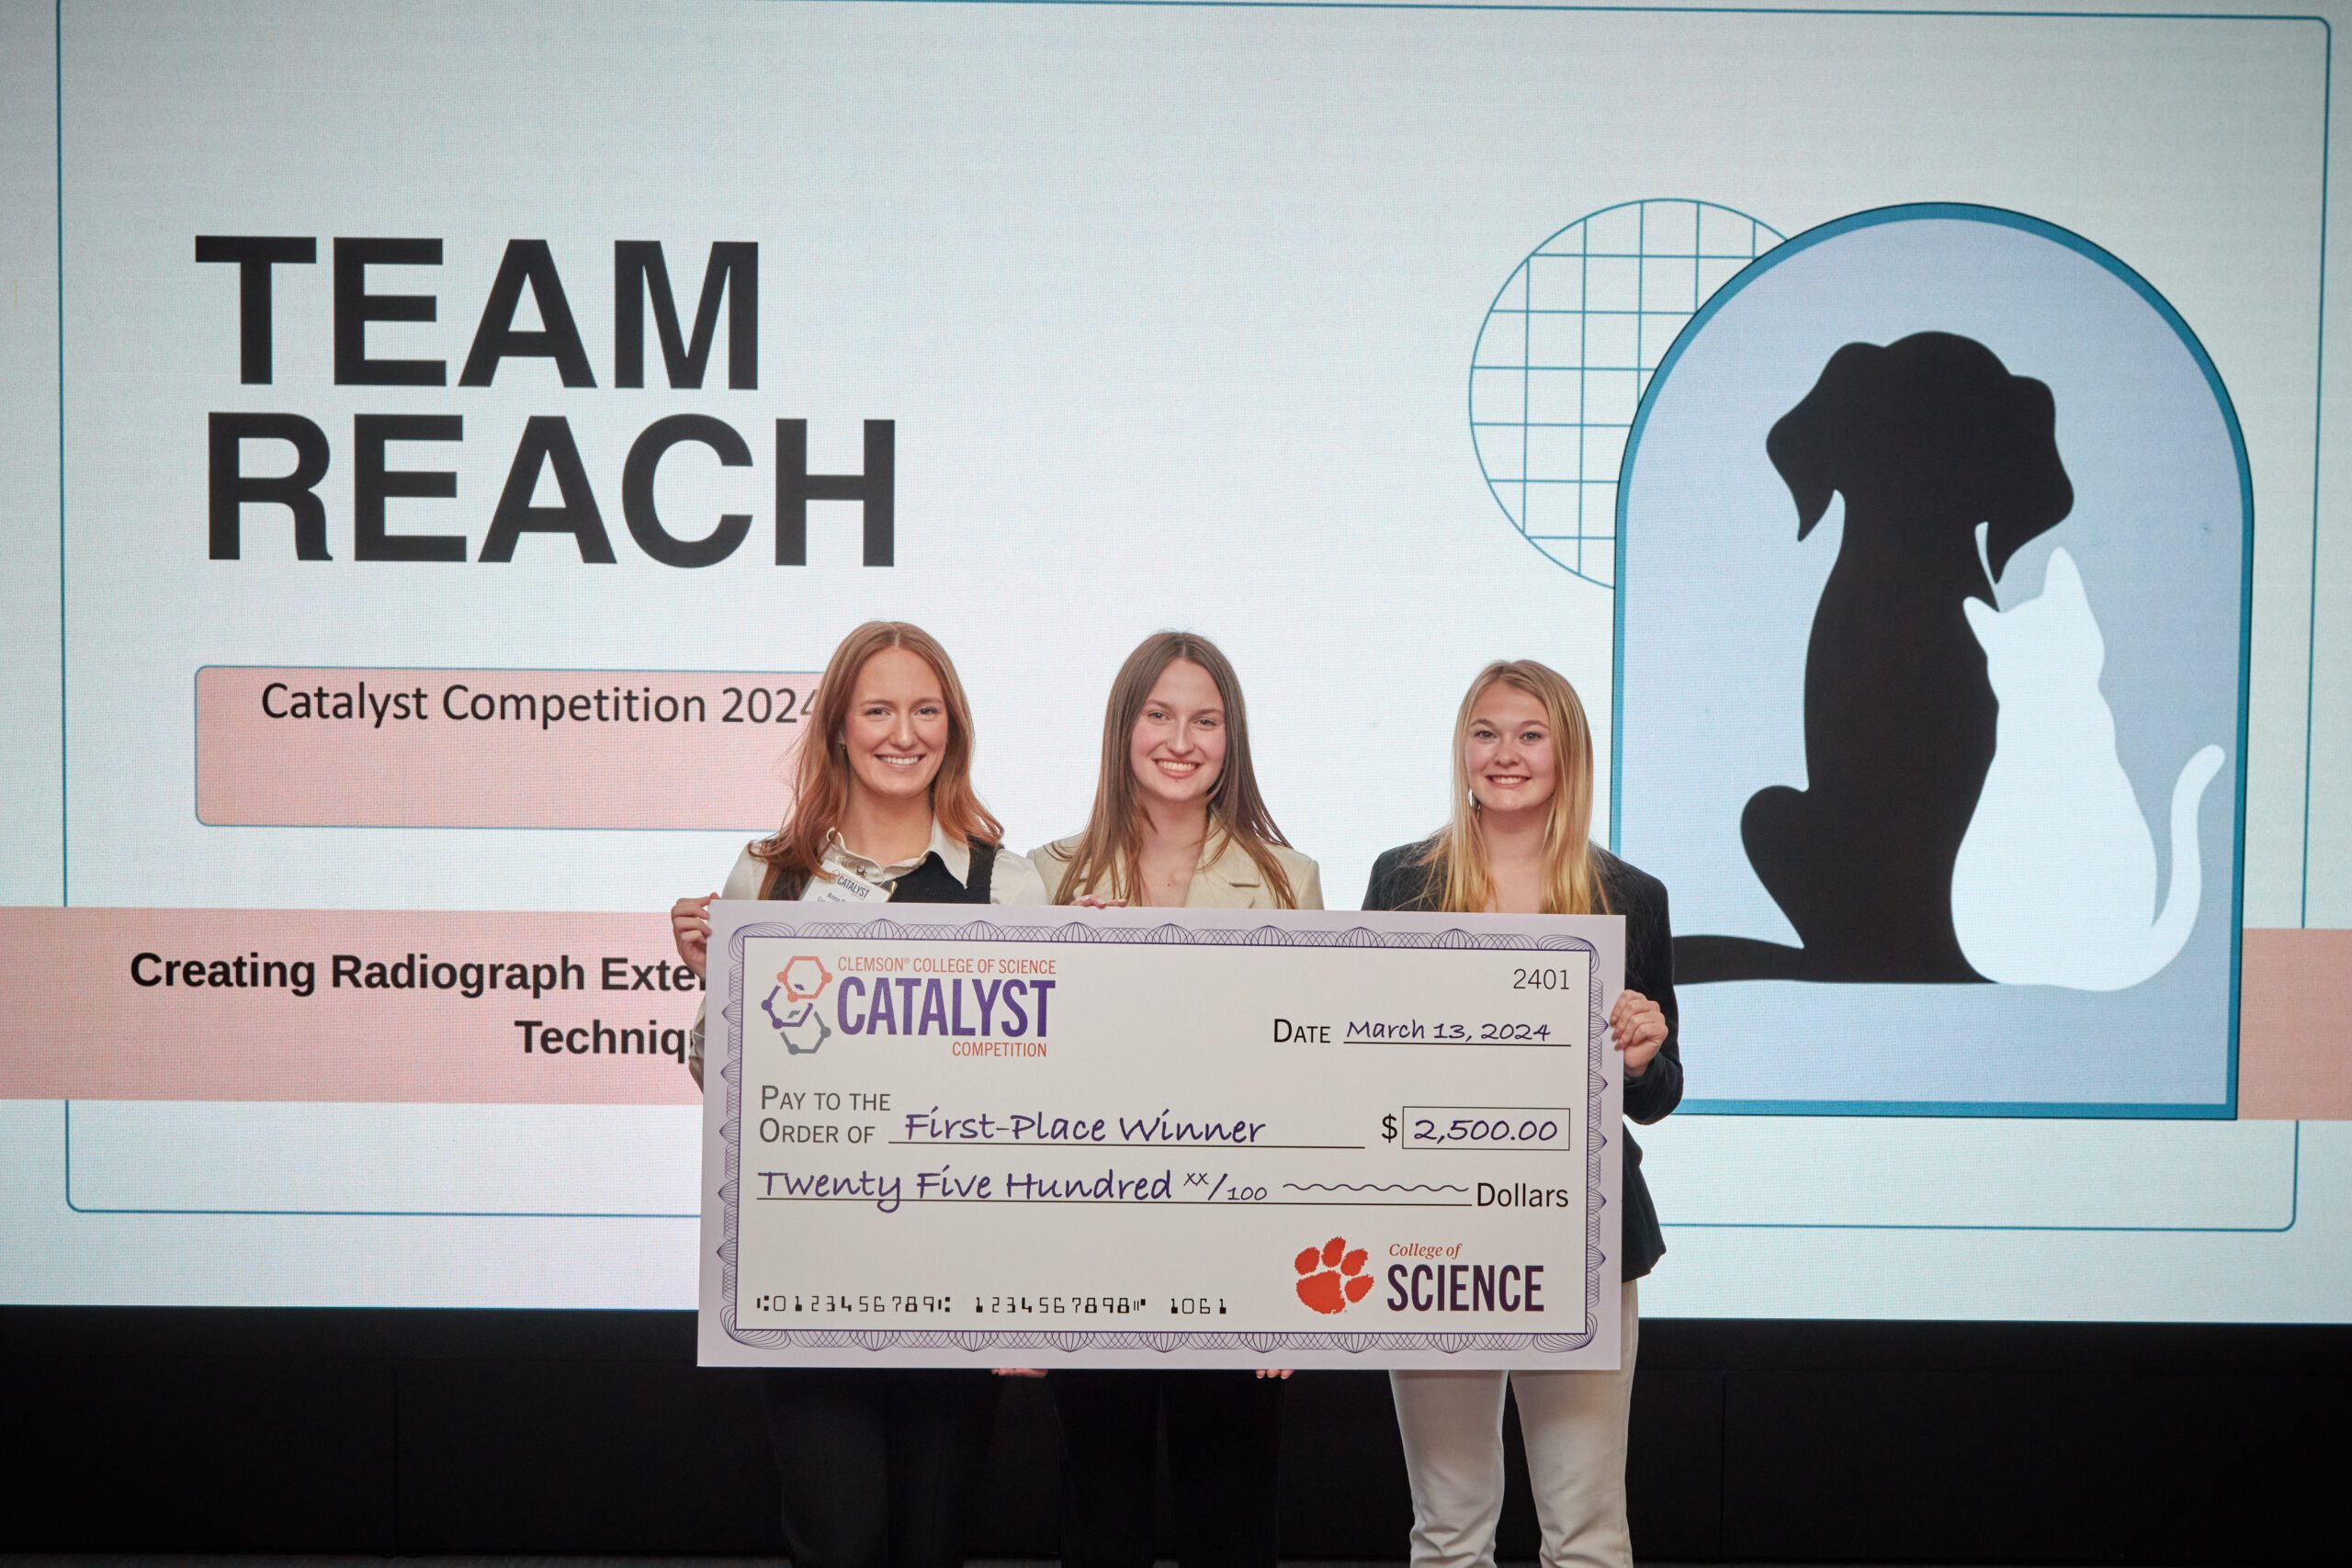 Three women holding a big check for winning the College of Science Catalyst Competion stand in front of a screen with the name of their team and an outline of a dog and cat